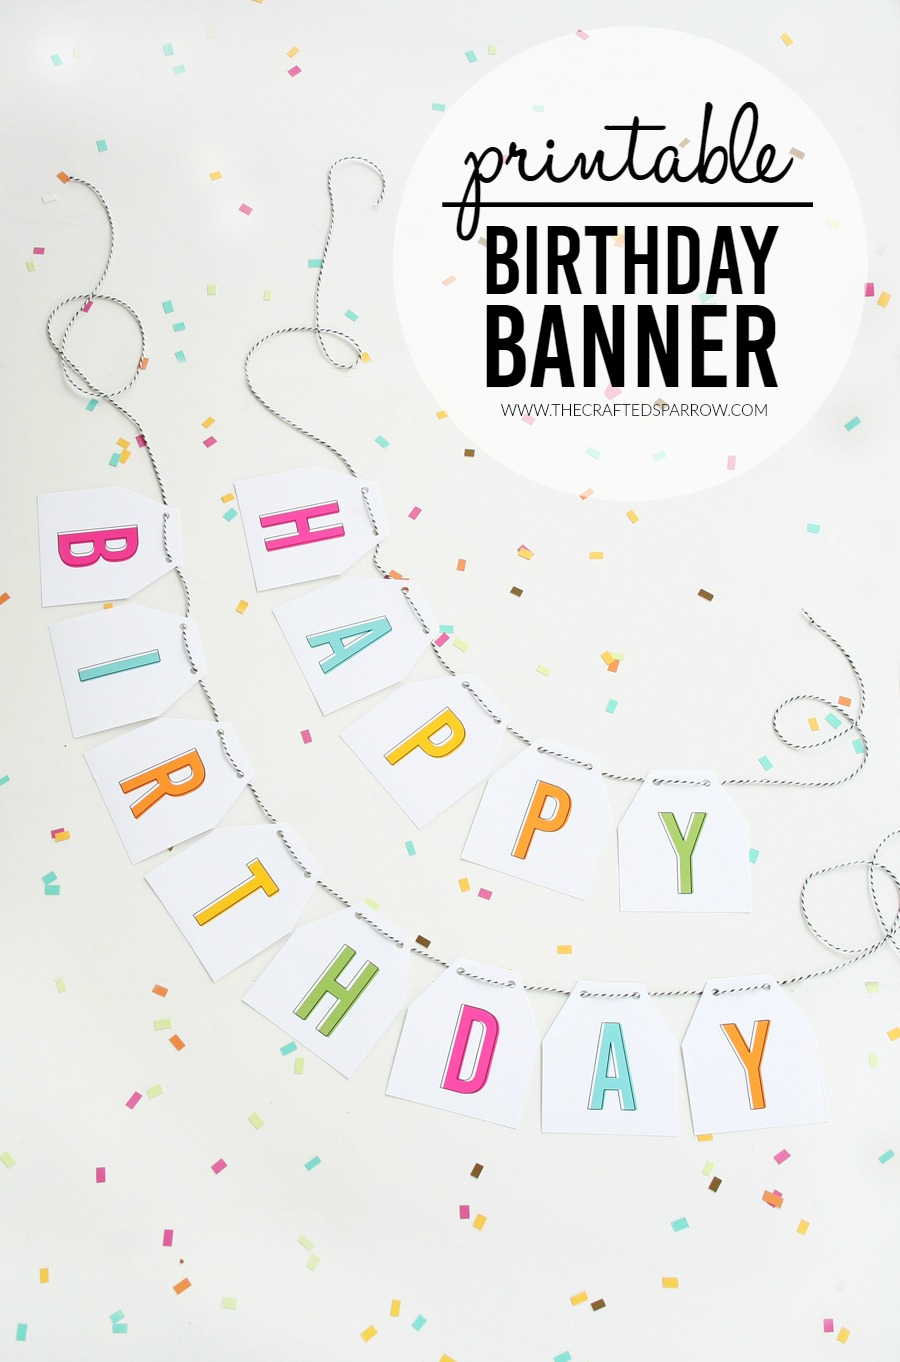 disso-dio-happy-birthday-banner-to-print